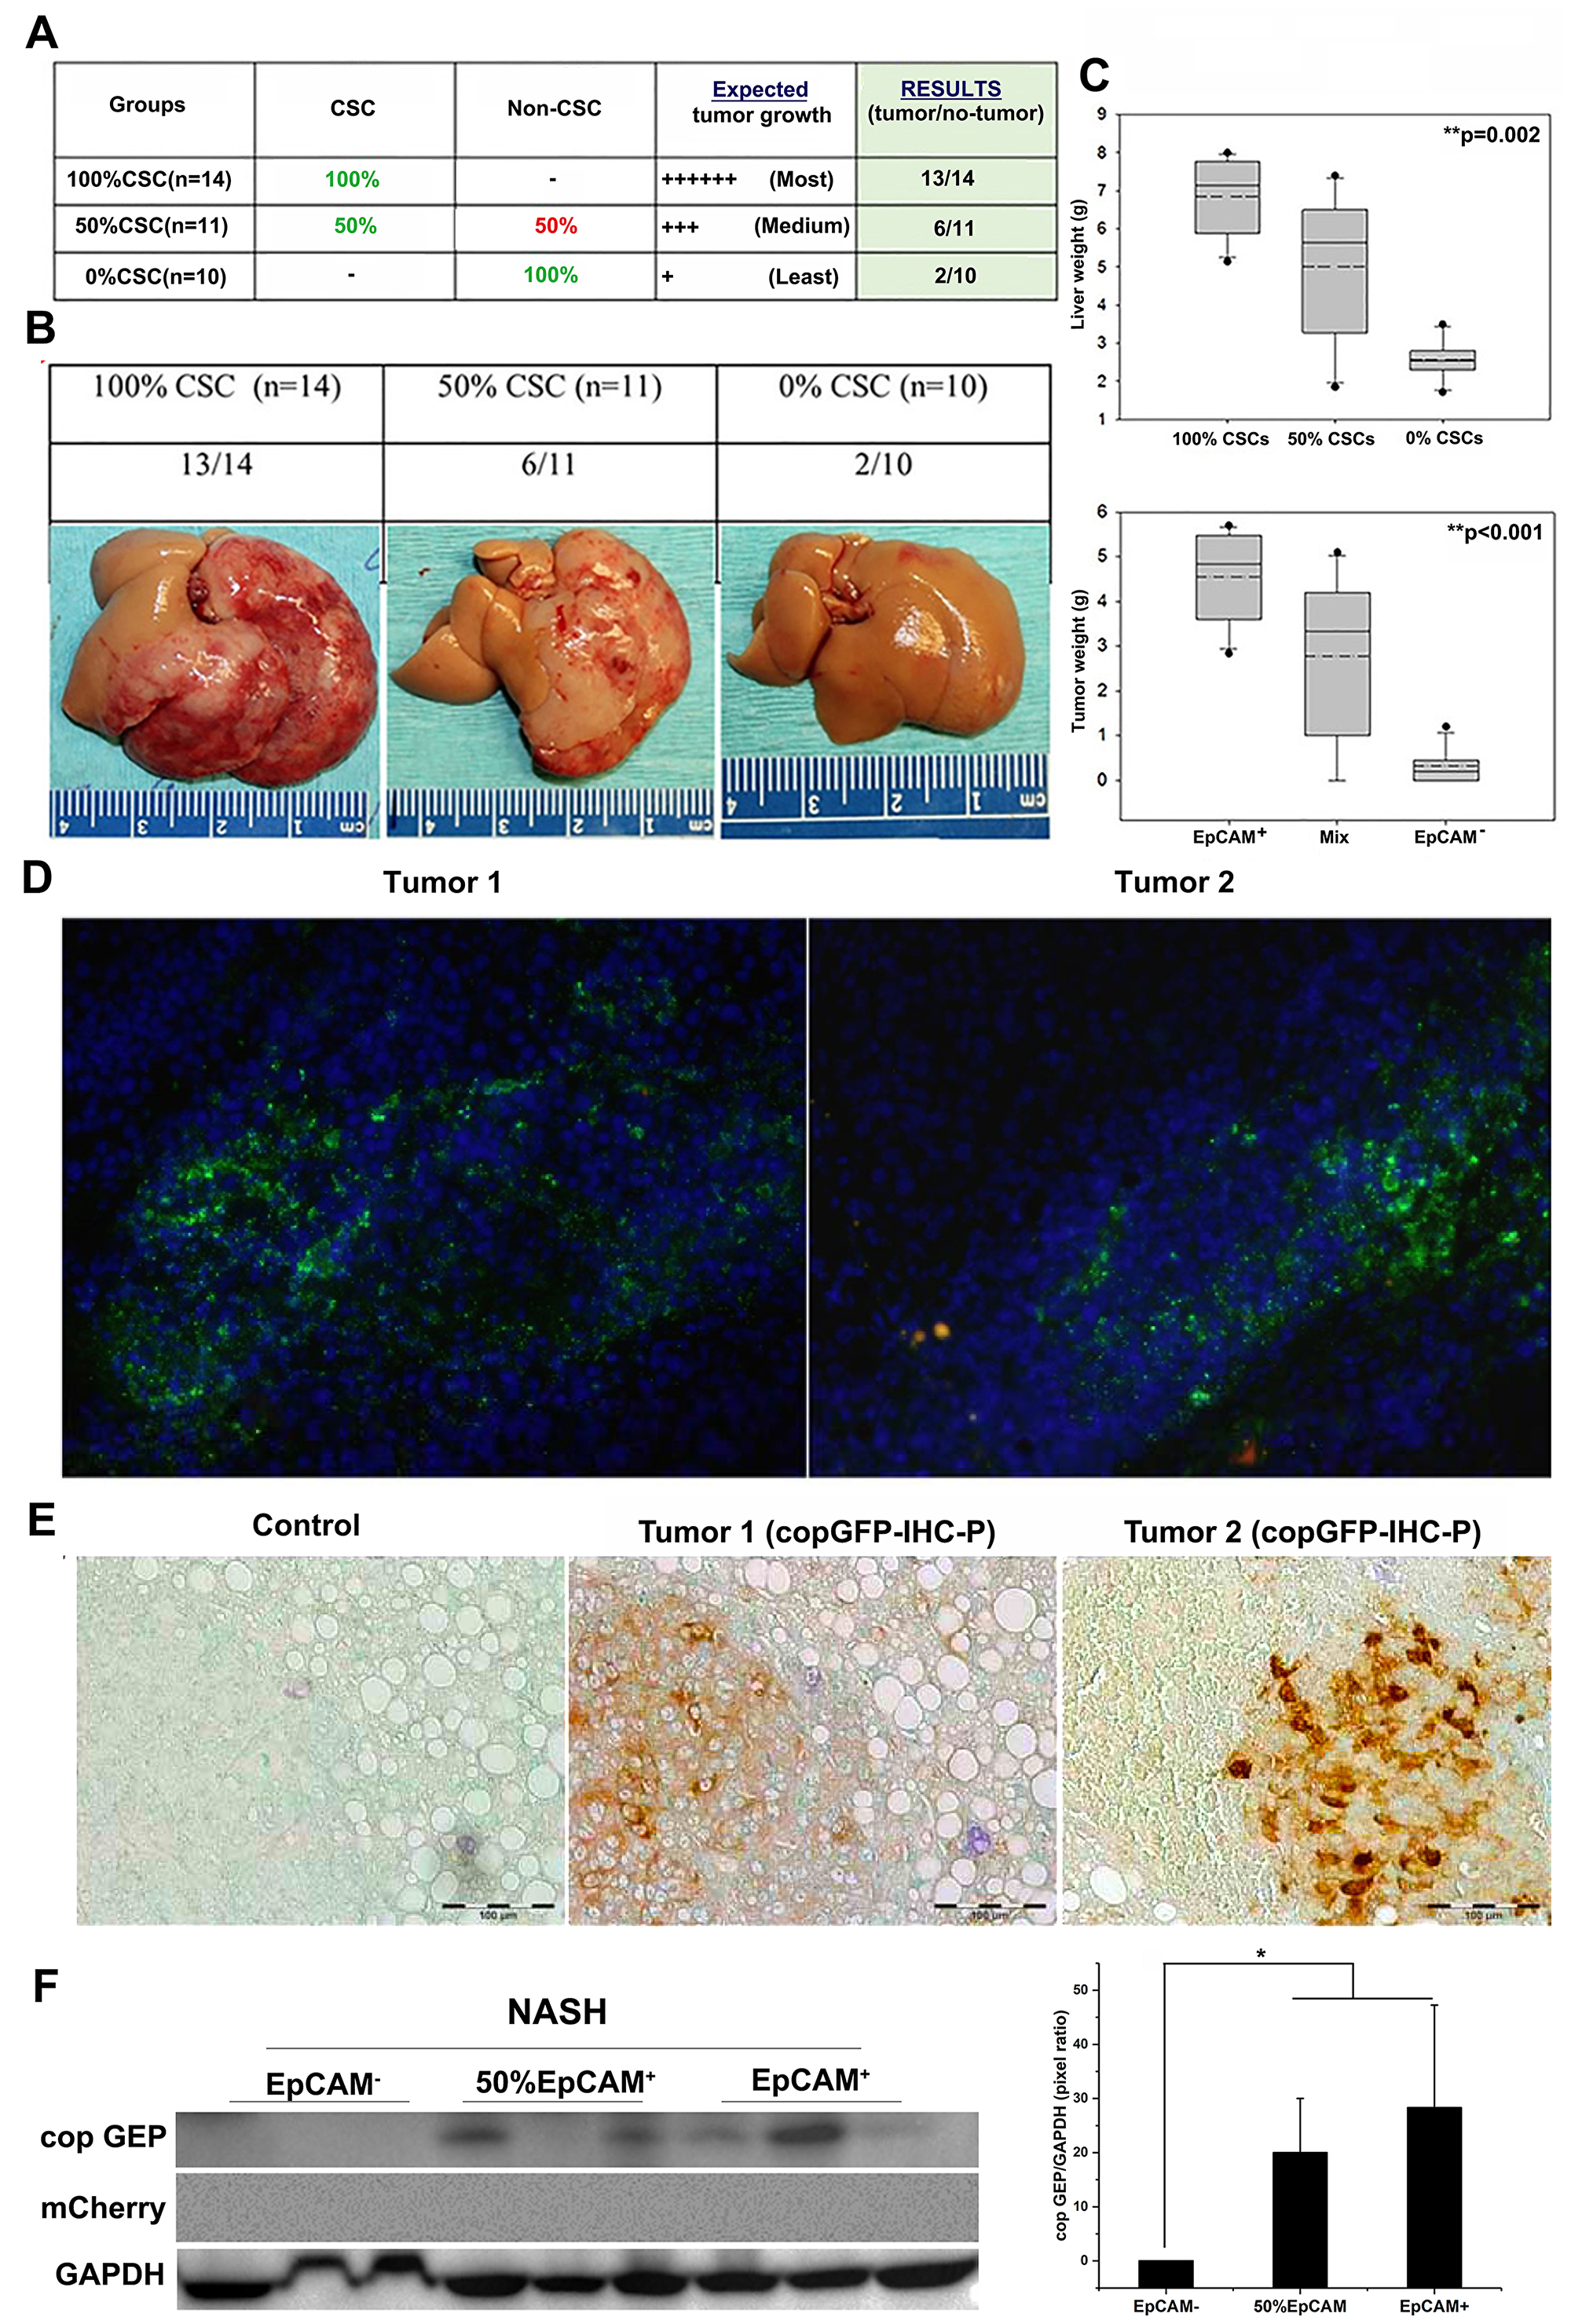 Lineage tracking study showed that tumor initiation in NASH liver microenvironment is dose-dependent of EpCAM+ CSCs.